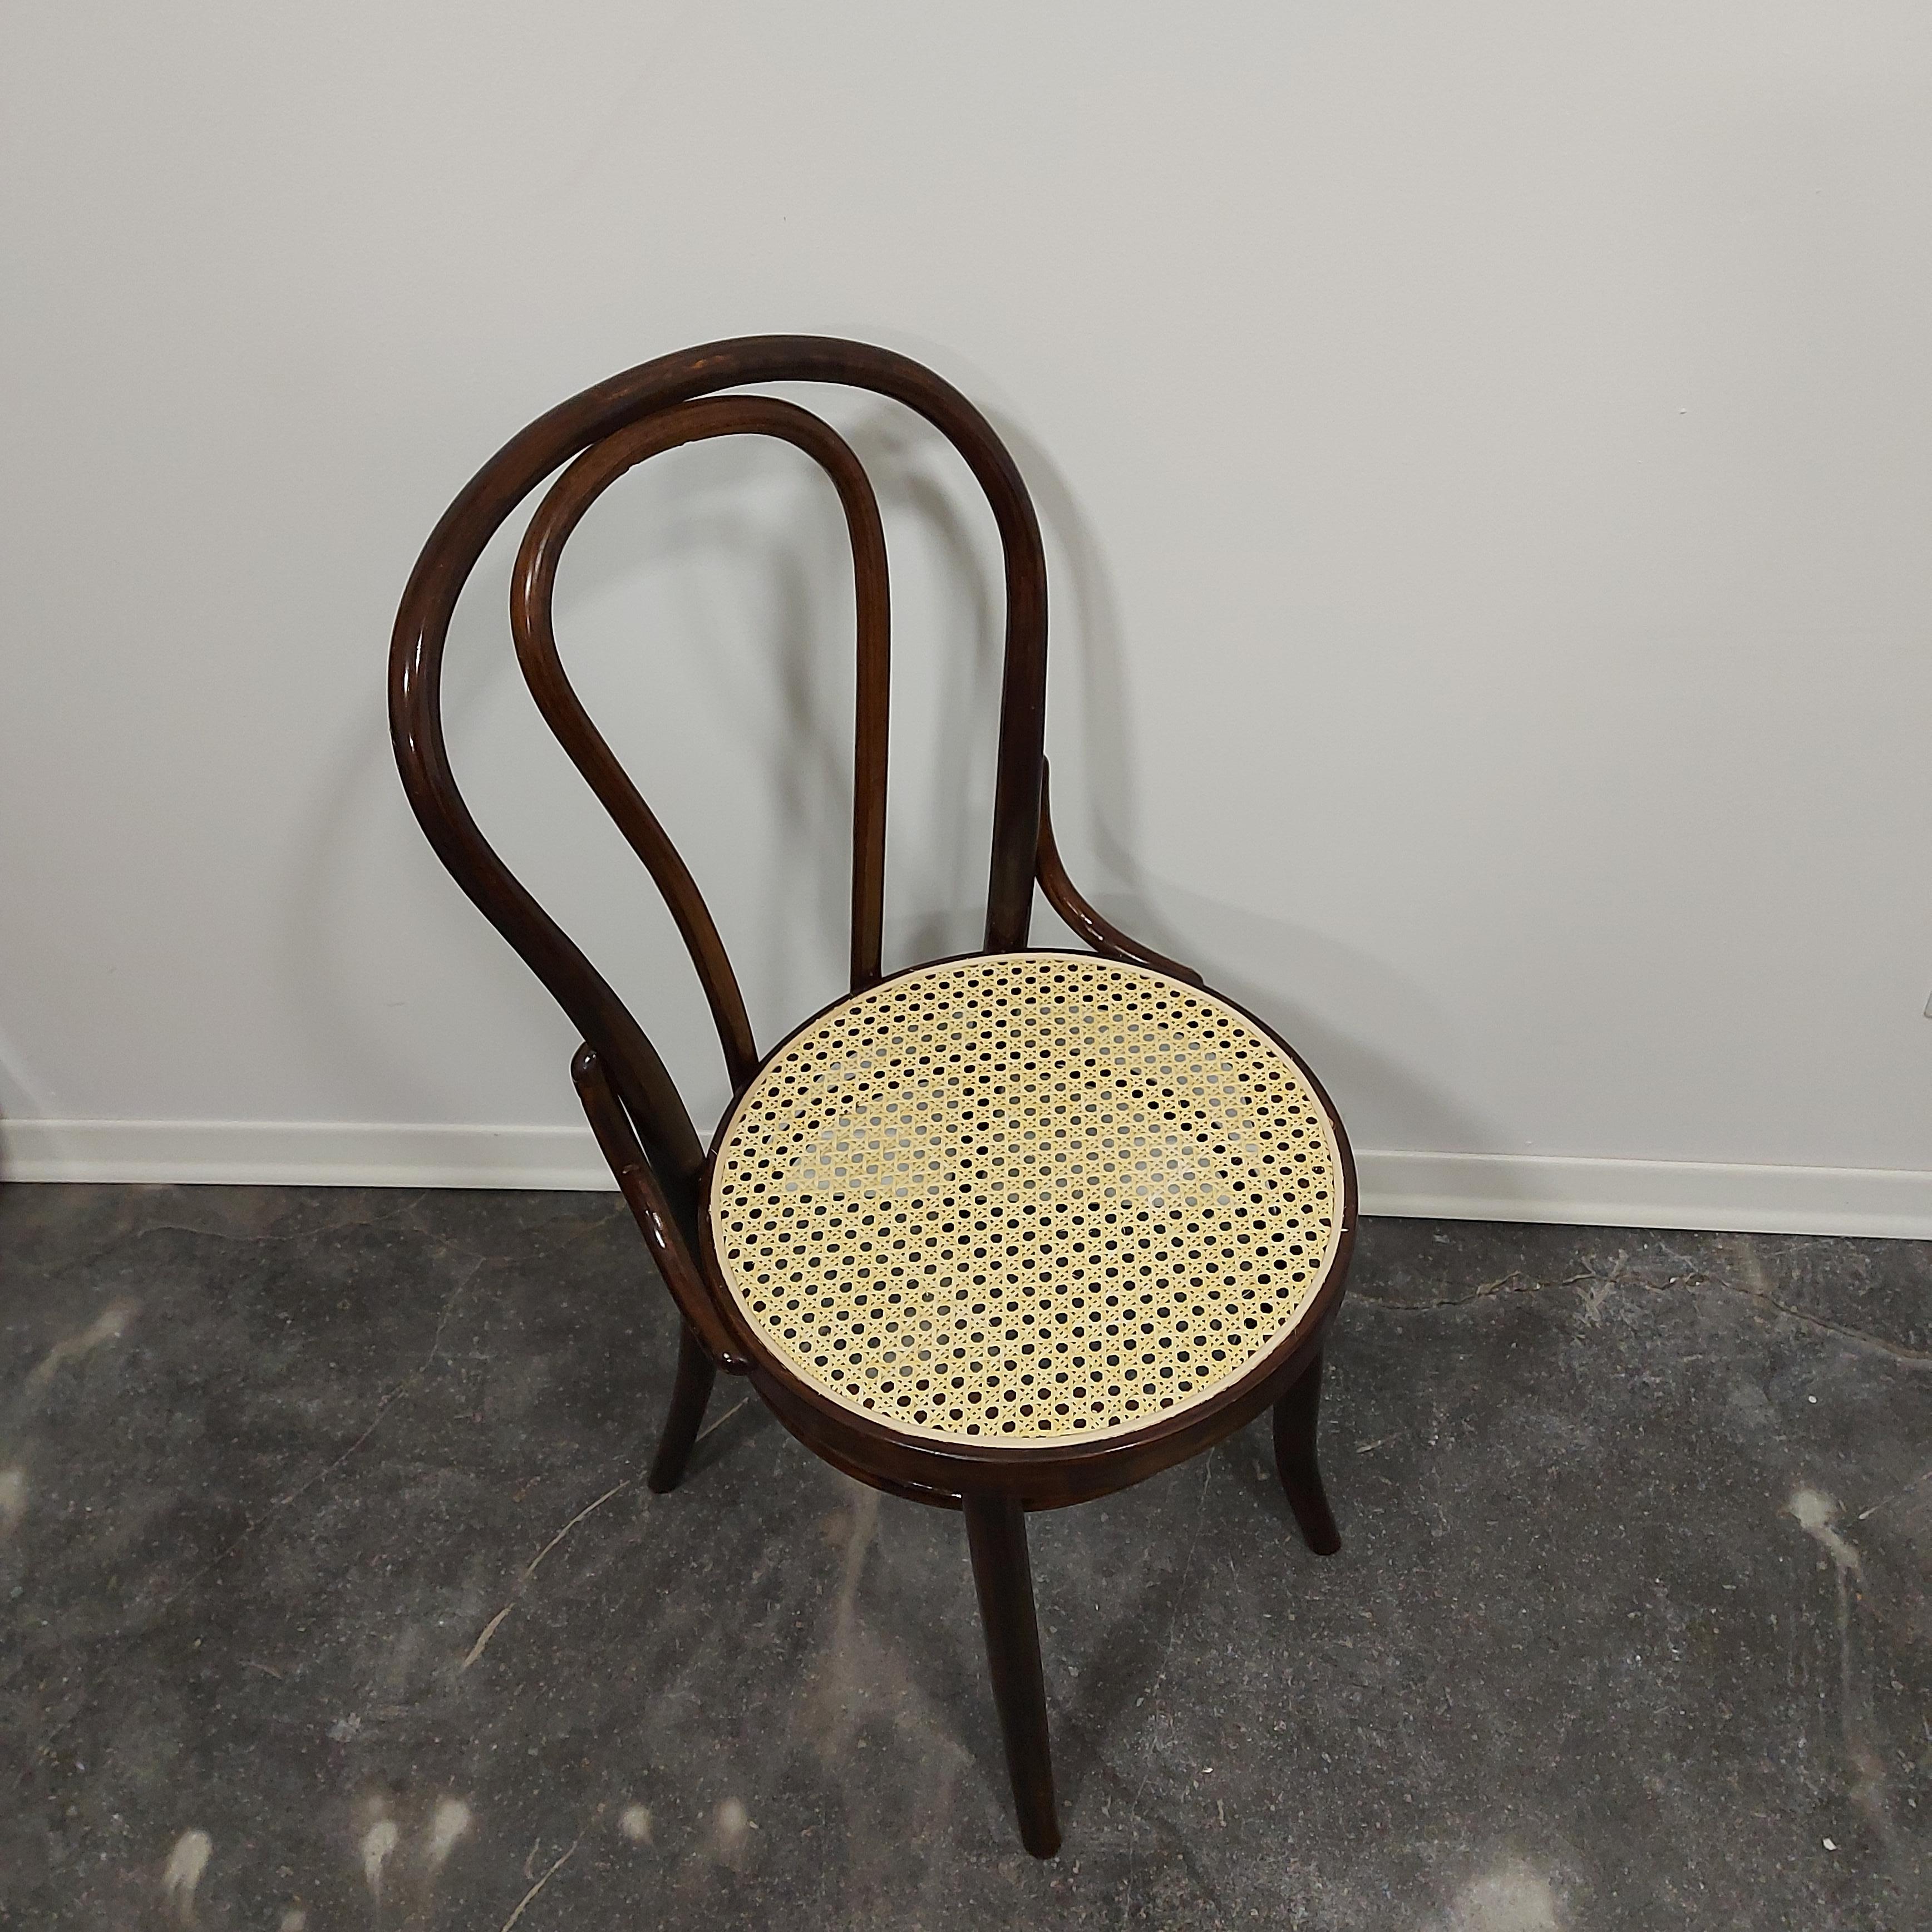 Thonet Dining chair No. 18 